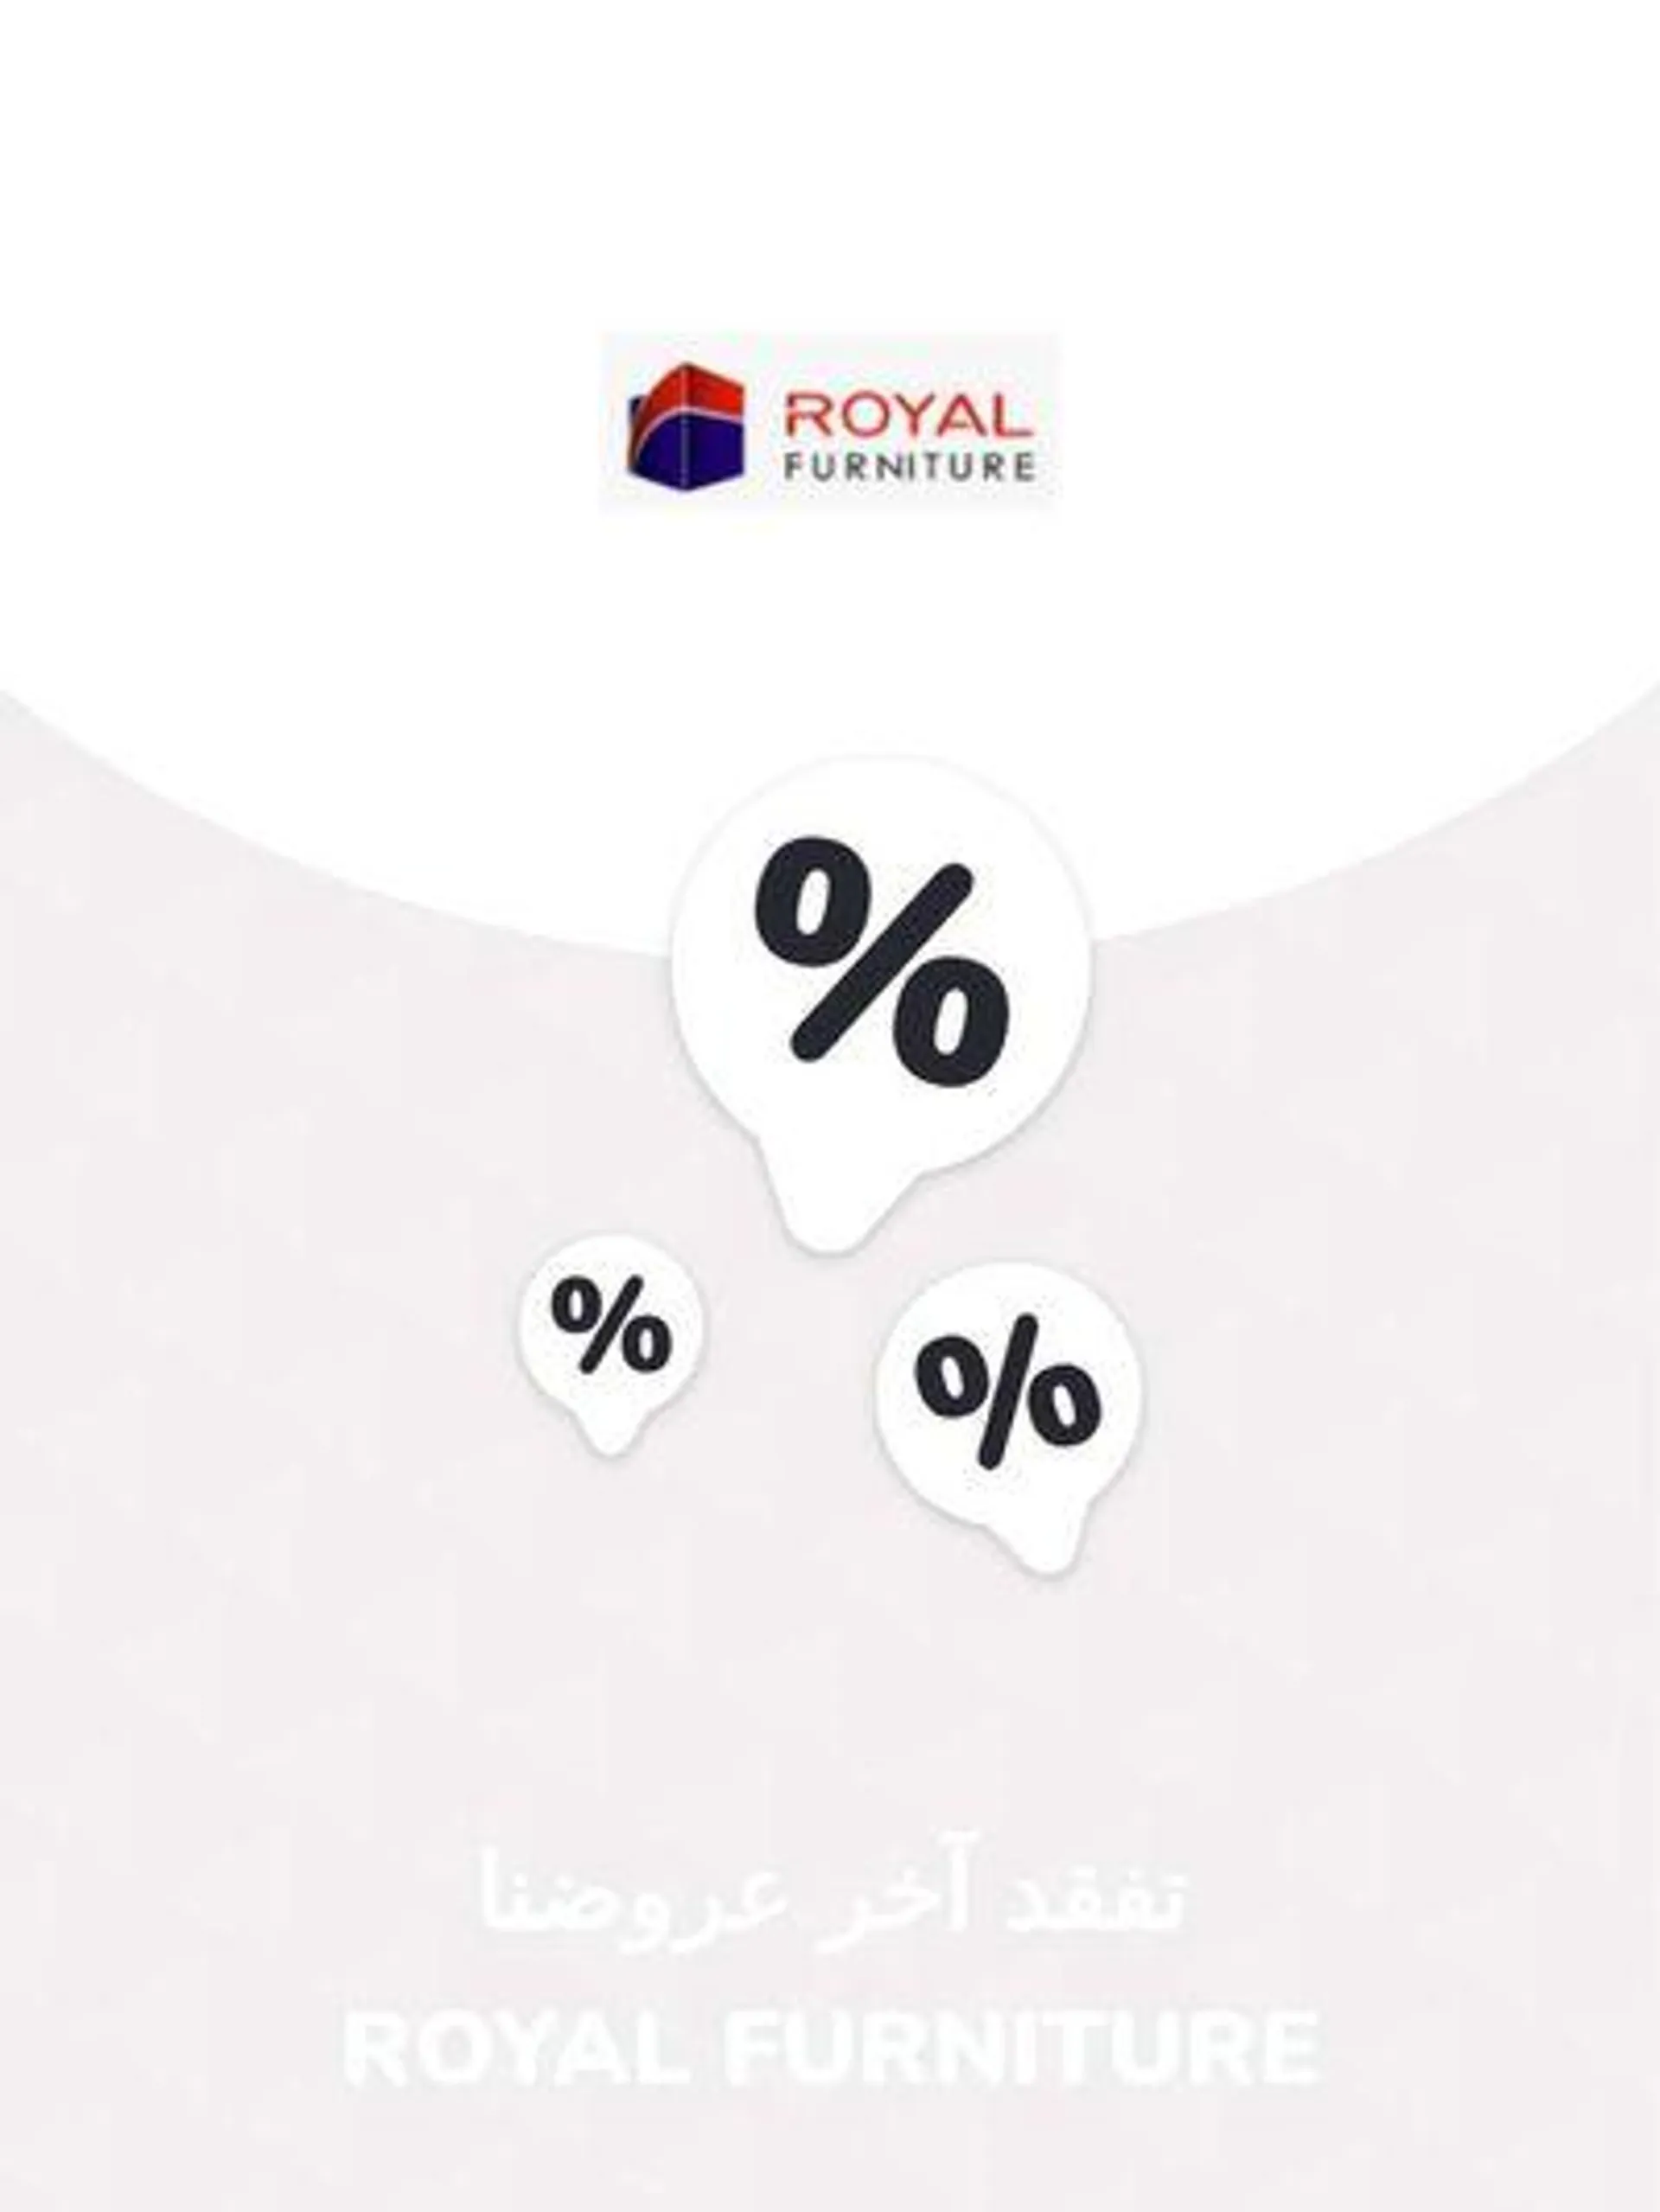 Offers Royal Furniture - 1